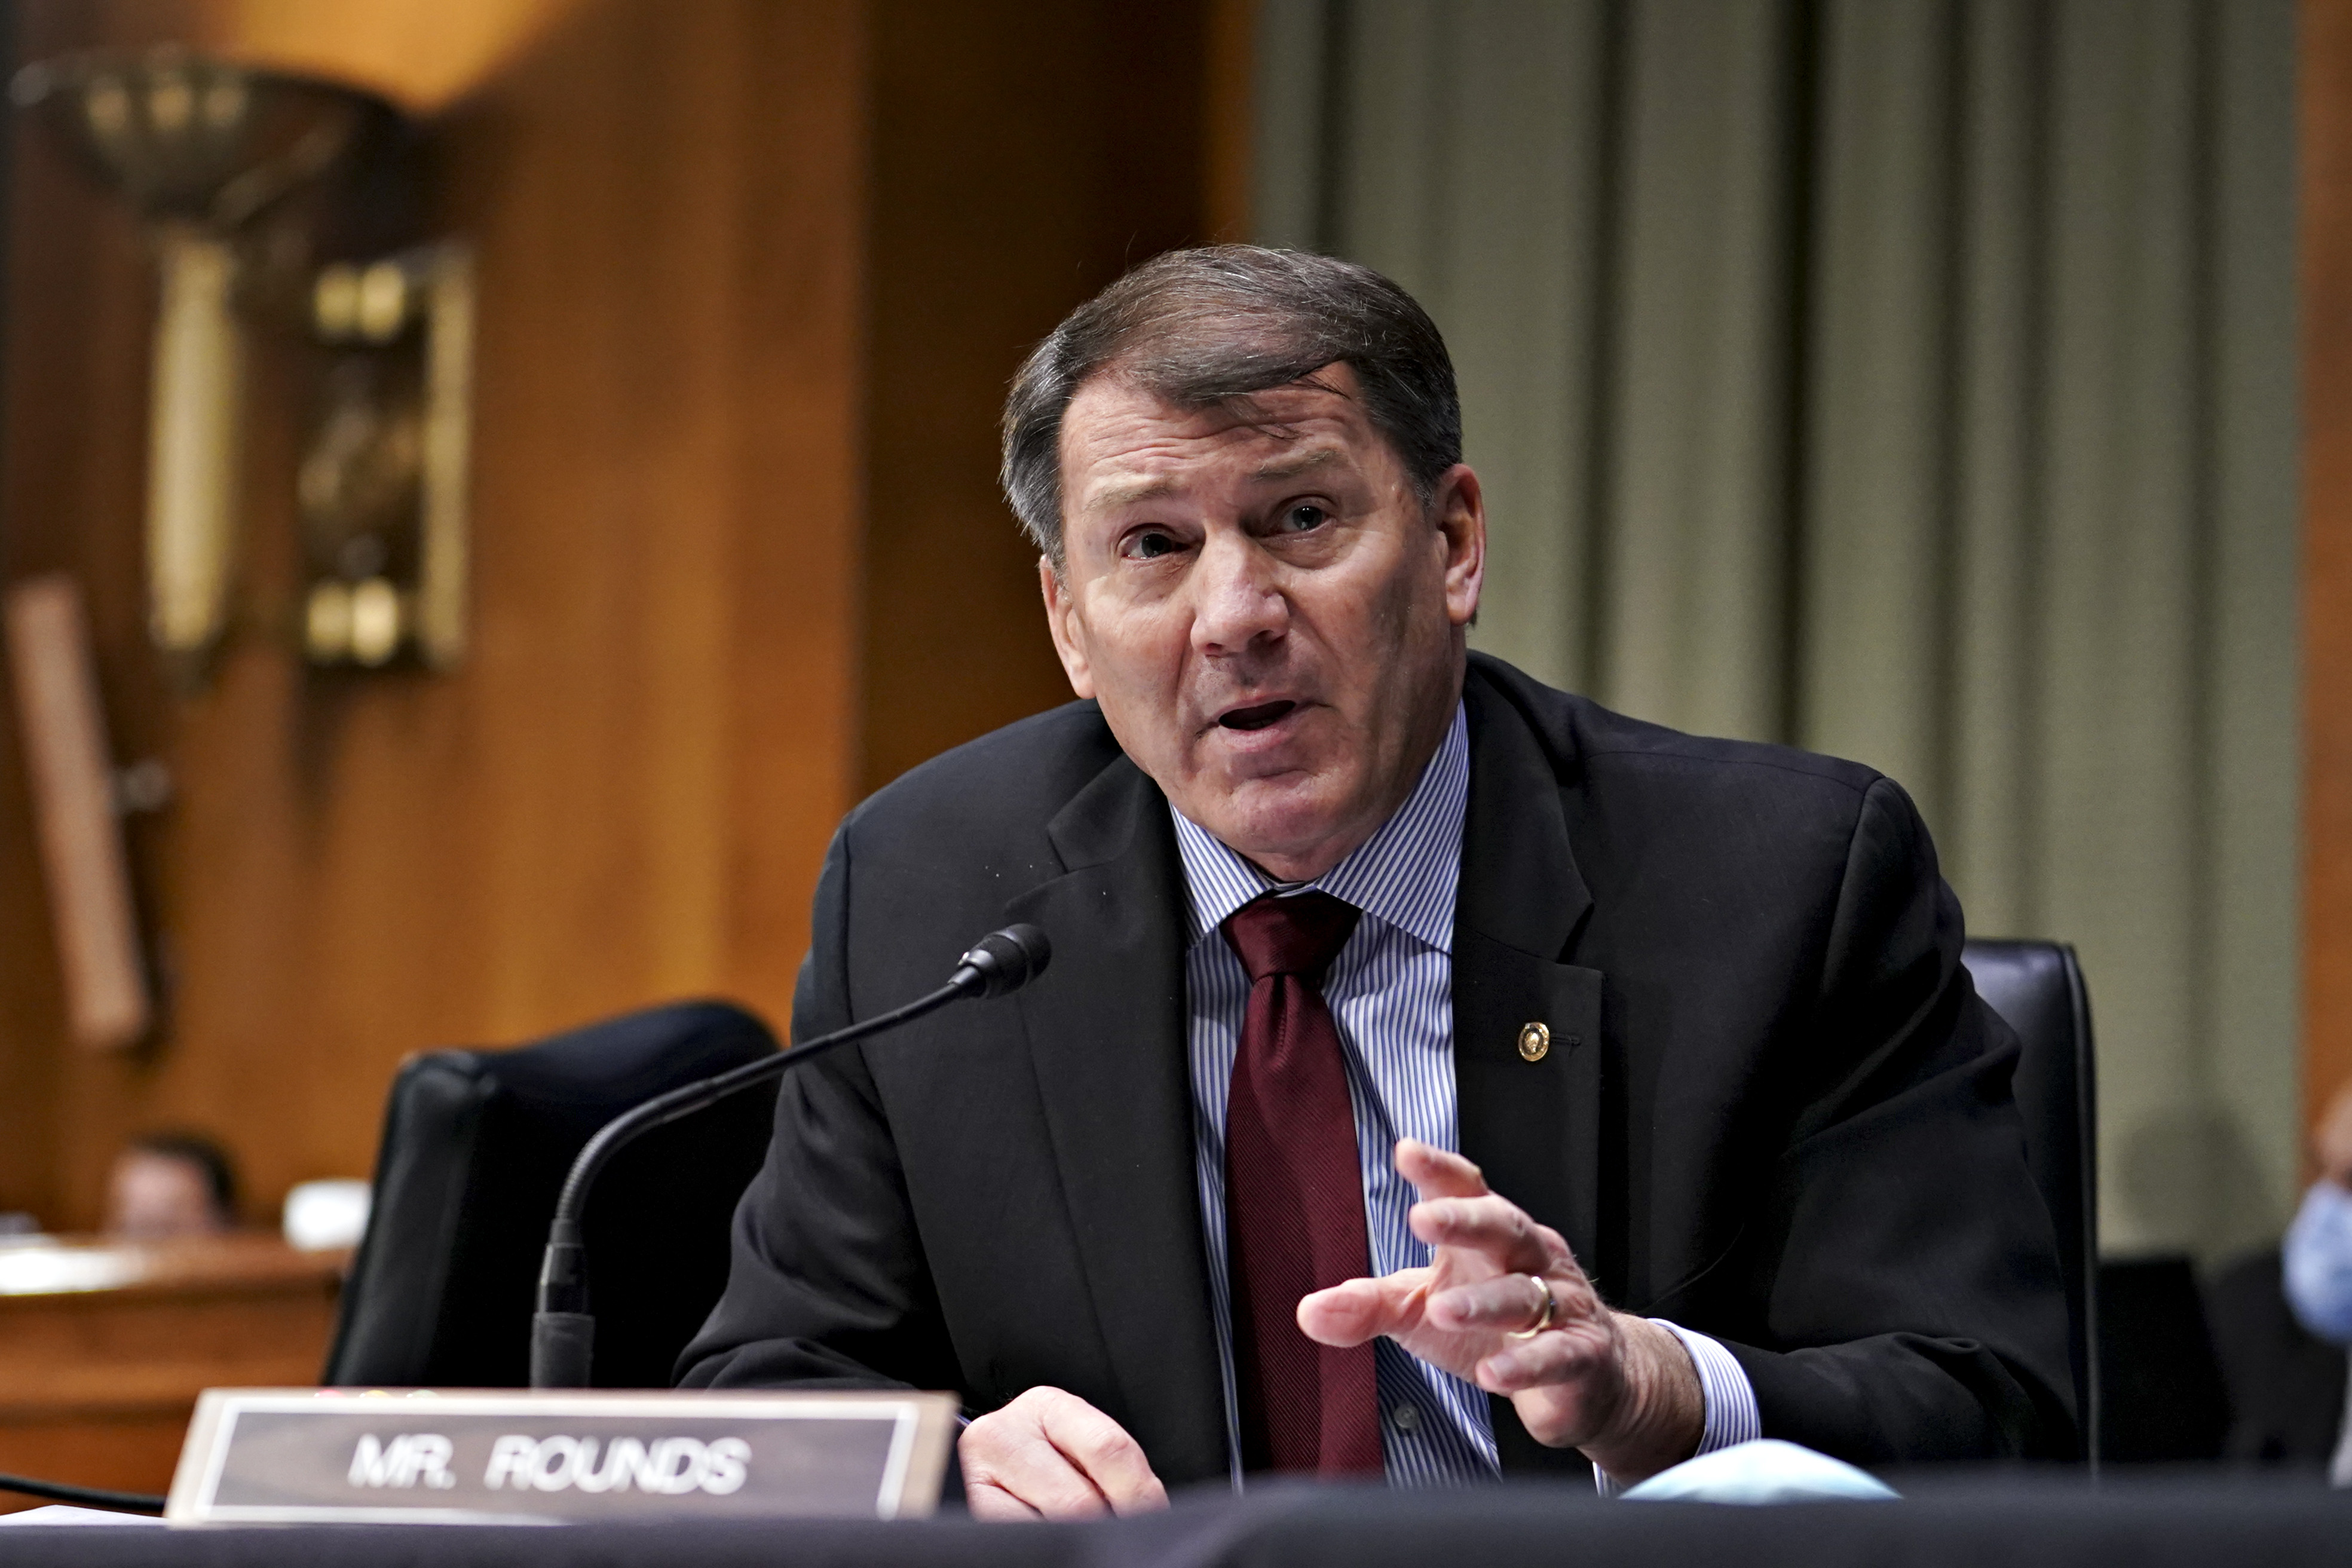 WASHINGTON, DC - JANUARY 27: Senator Mike Rounds, a Republican from South Dakota, speaks during a Senate Veterans' Affairs Committee confirmation hearing for Denis McDonough, U.S. secretary of Veterans Affairs (VA) nominee for U.S. President Joe Biden, on January 27, 2021 in Washington, D.C. As Barack Obama’s chief of staff, McDonough oversaw the VAs overhaul in response to its 2014 wait-time scandal and previously served as a deputy national security adviser. (Photo Sarah Silbiger-Pool/Getty Images)